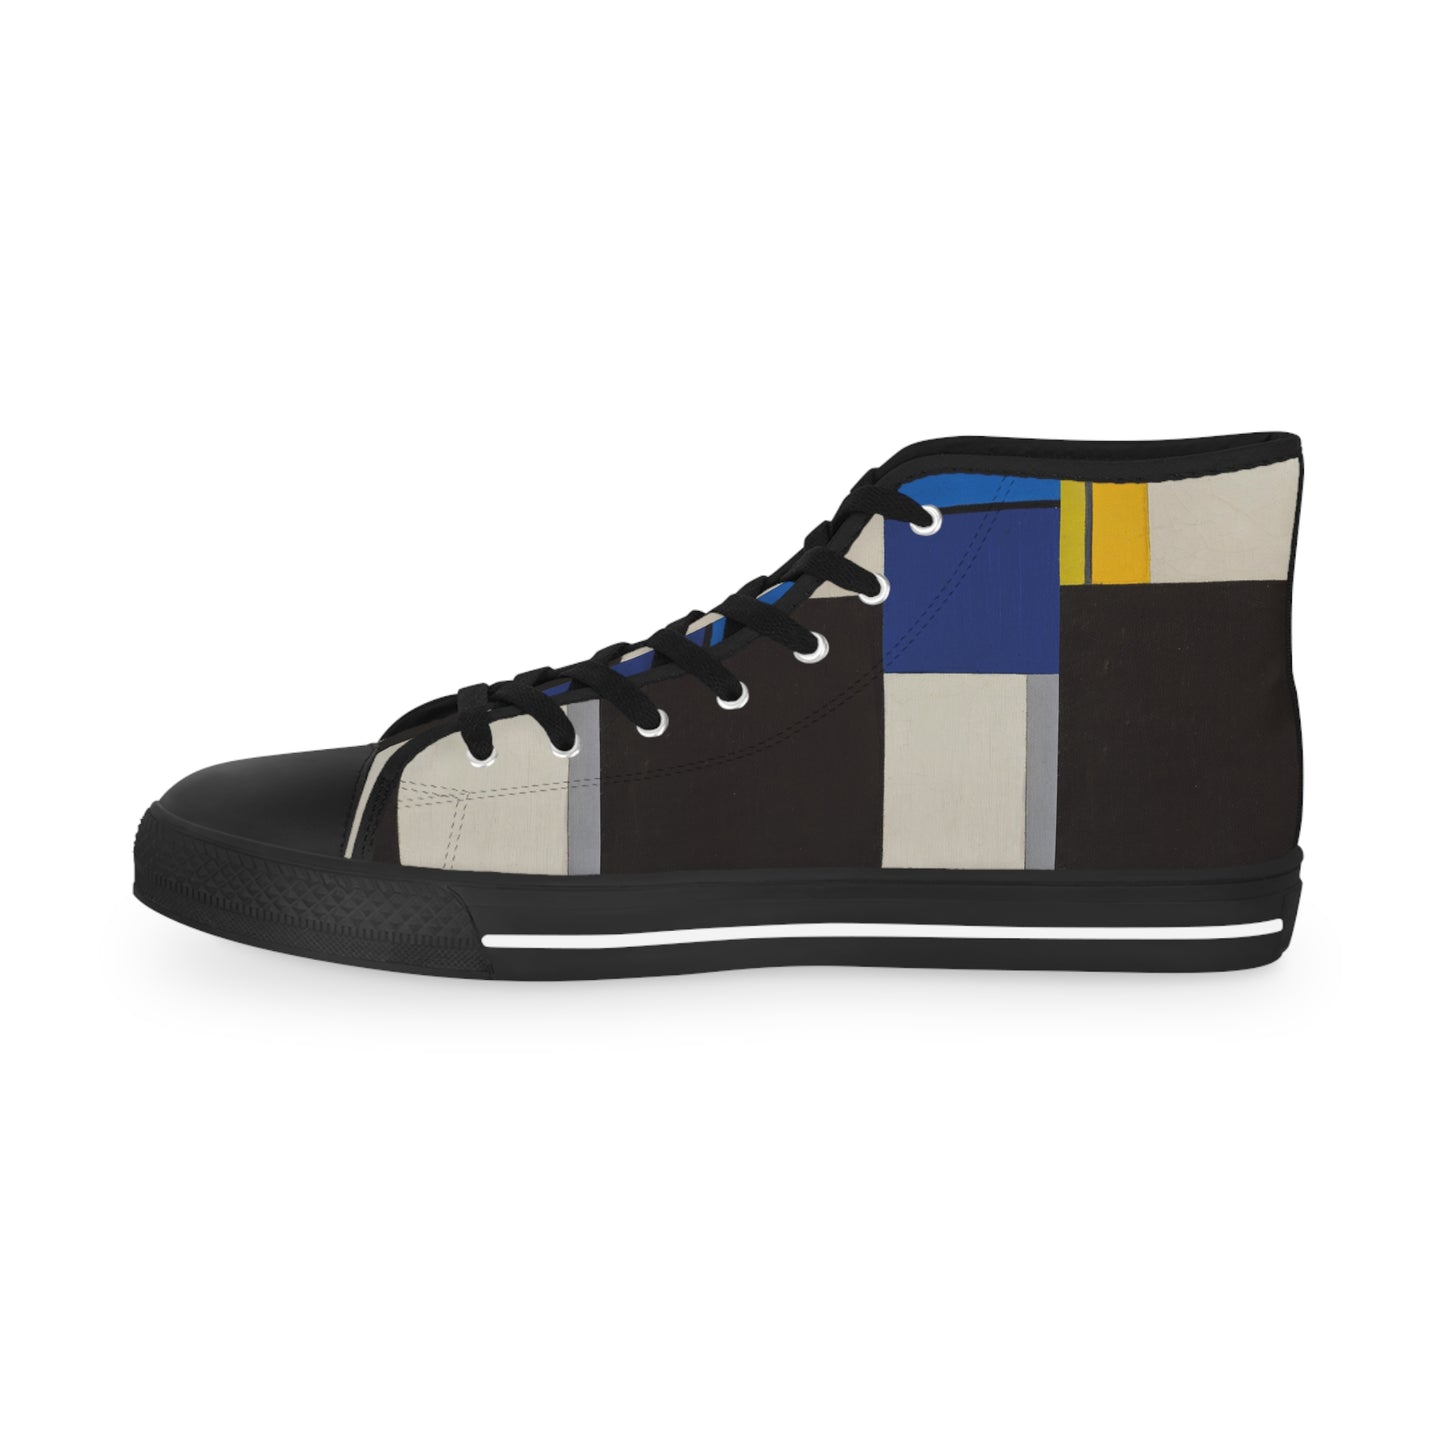 THEO VAN DOESBURG - COMPOSITION XXI - HIGH TOP SNEAKERS FOR HIM 